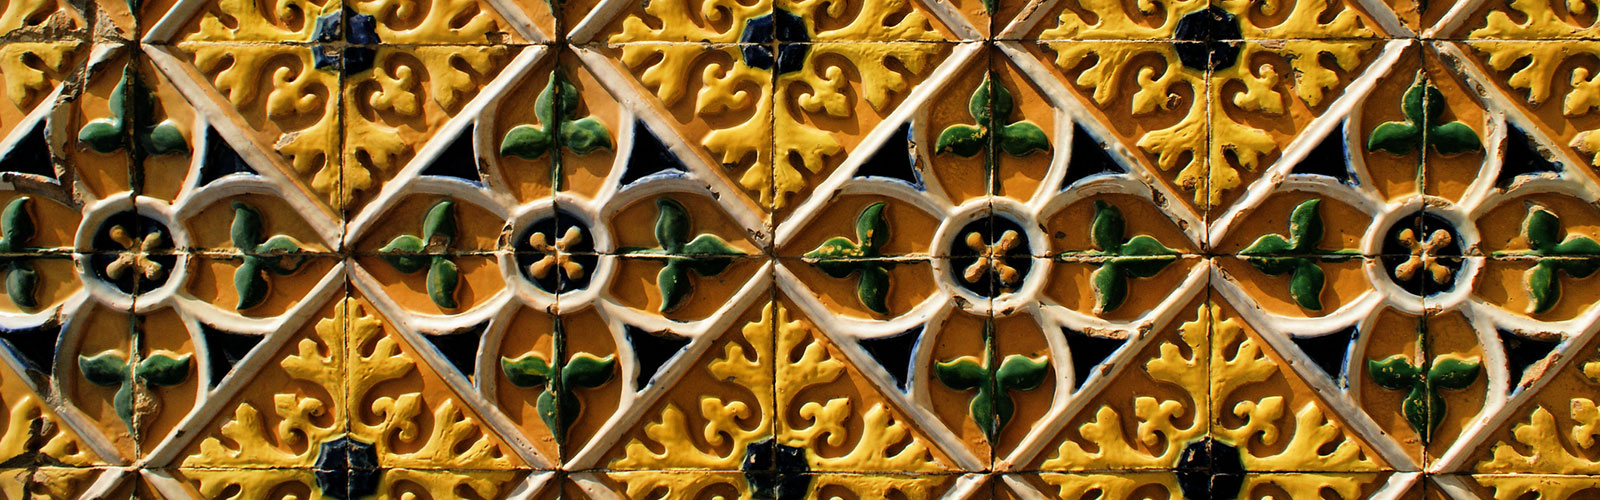 yellow and green tiles